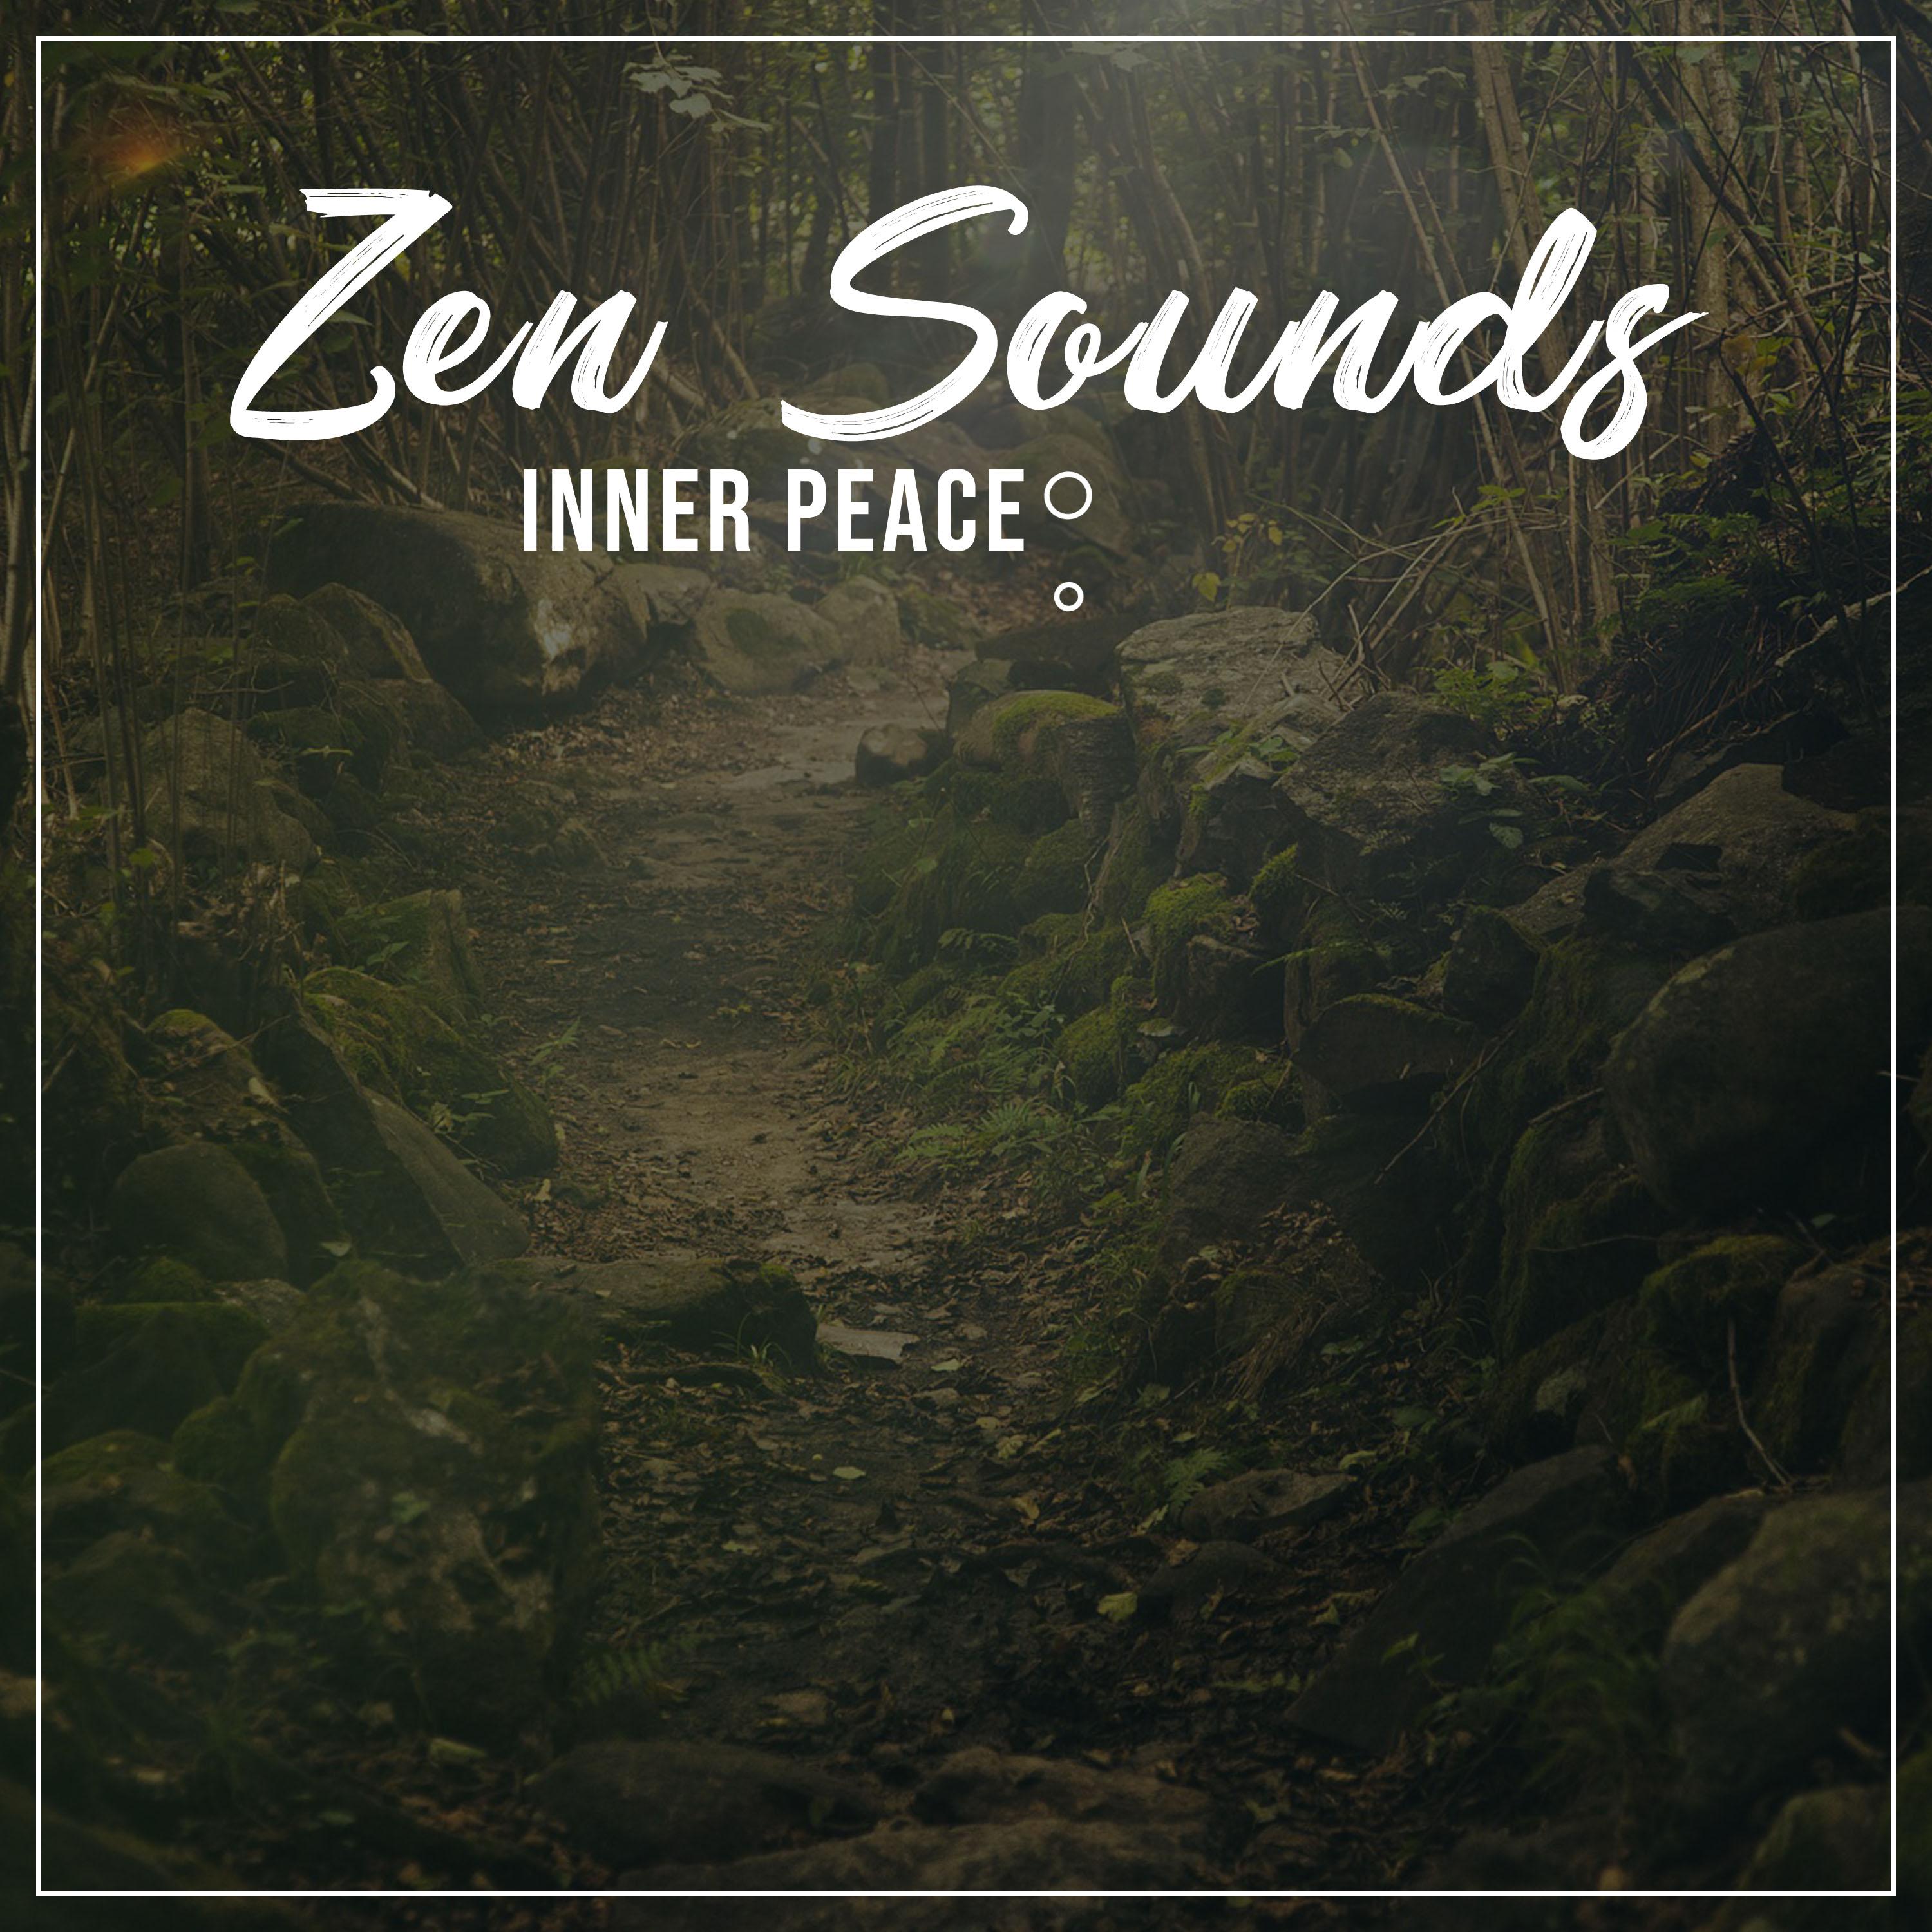 18 Peaceful Sounds to Still the Mind